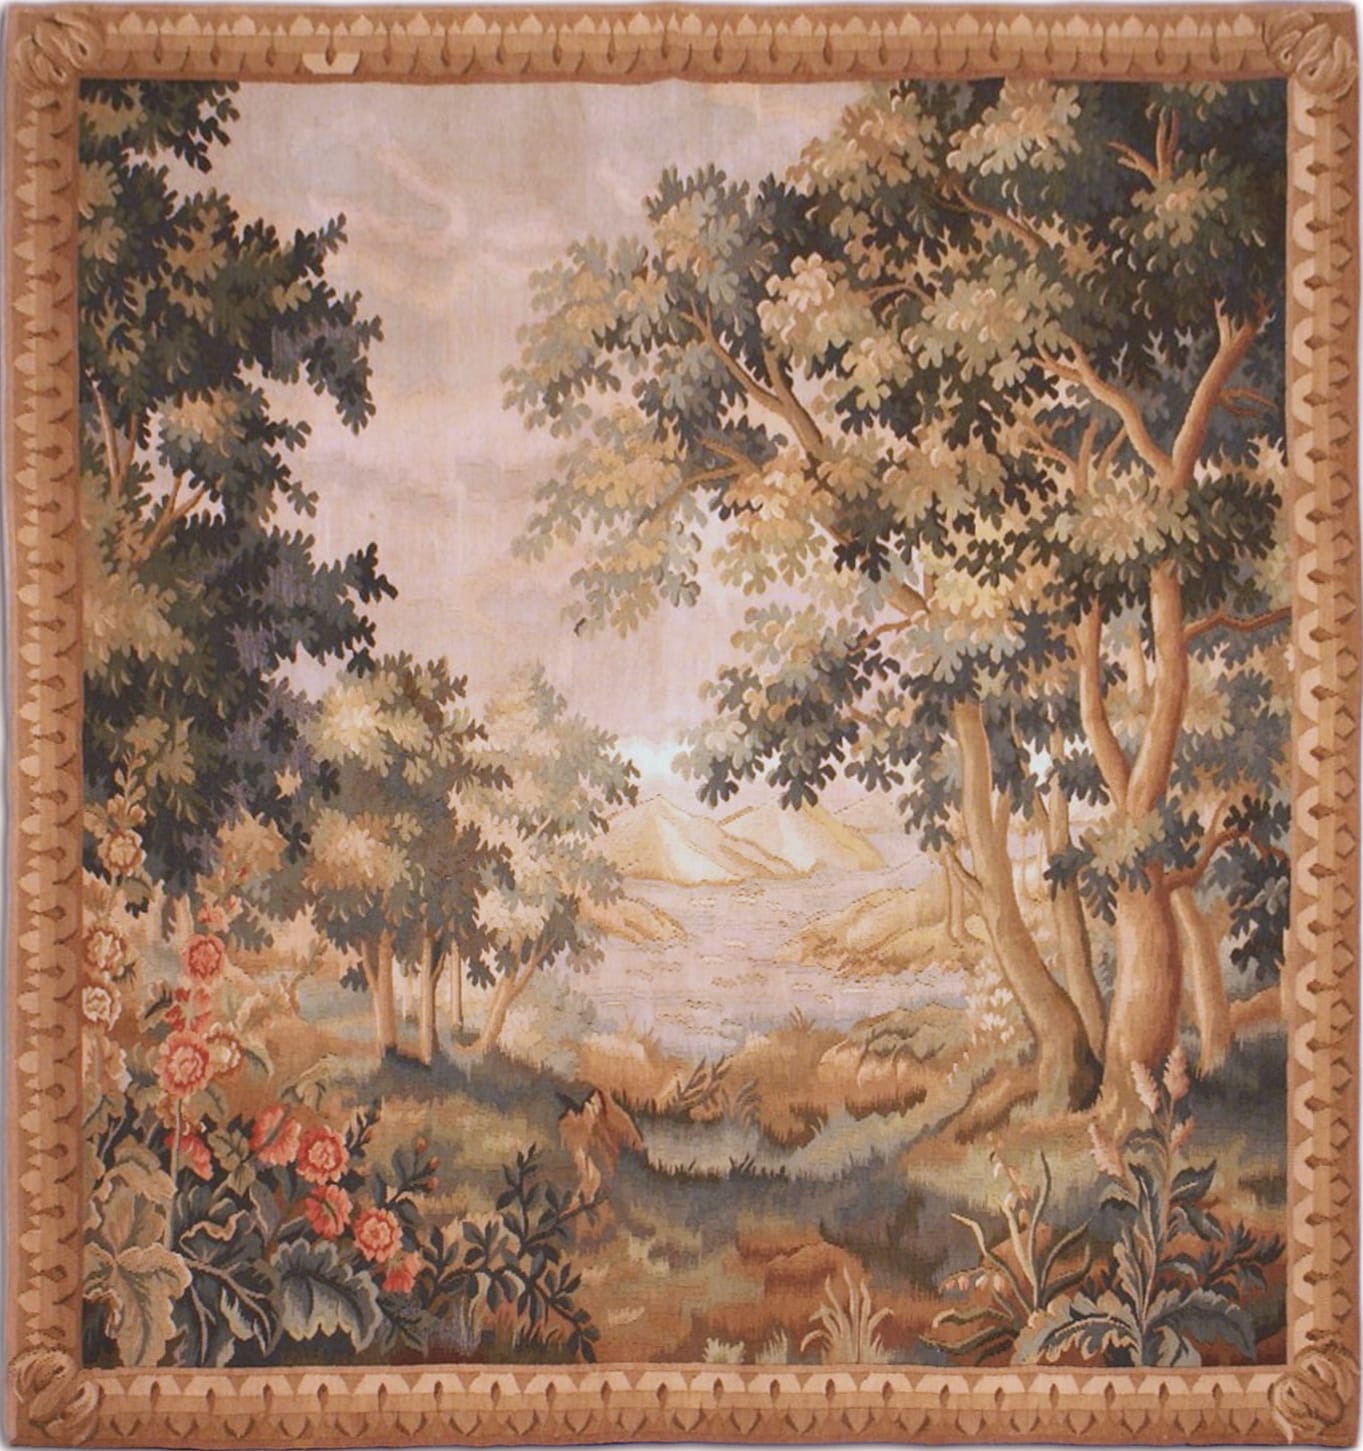 Hand Woven Verdure Aubusson Style Square Wall Tapestry Hand Woven Verdure Aubusson Style Square Wall Tapestry